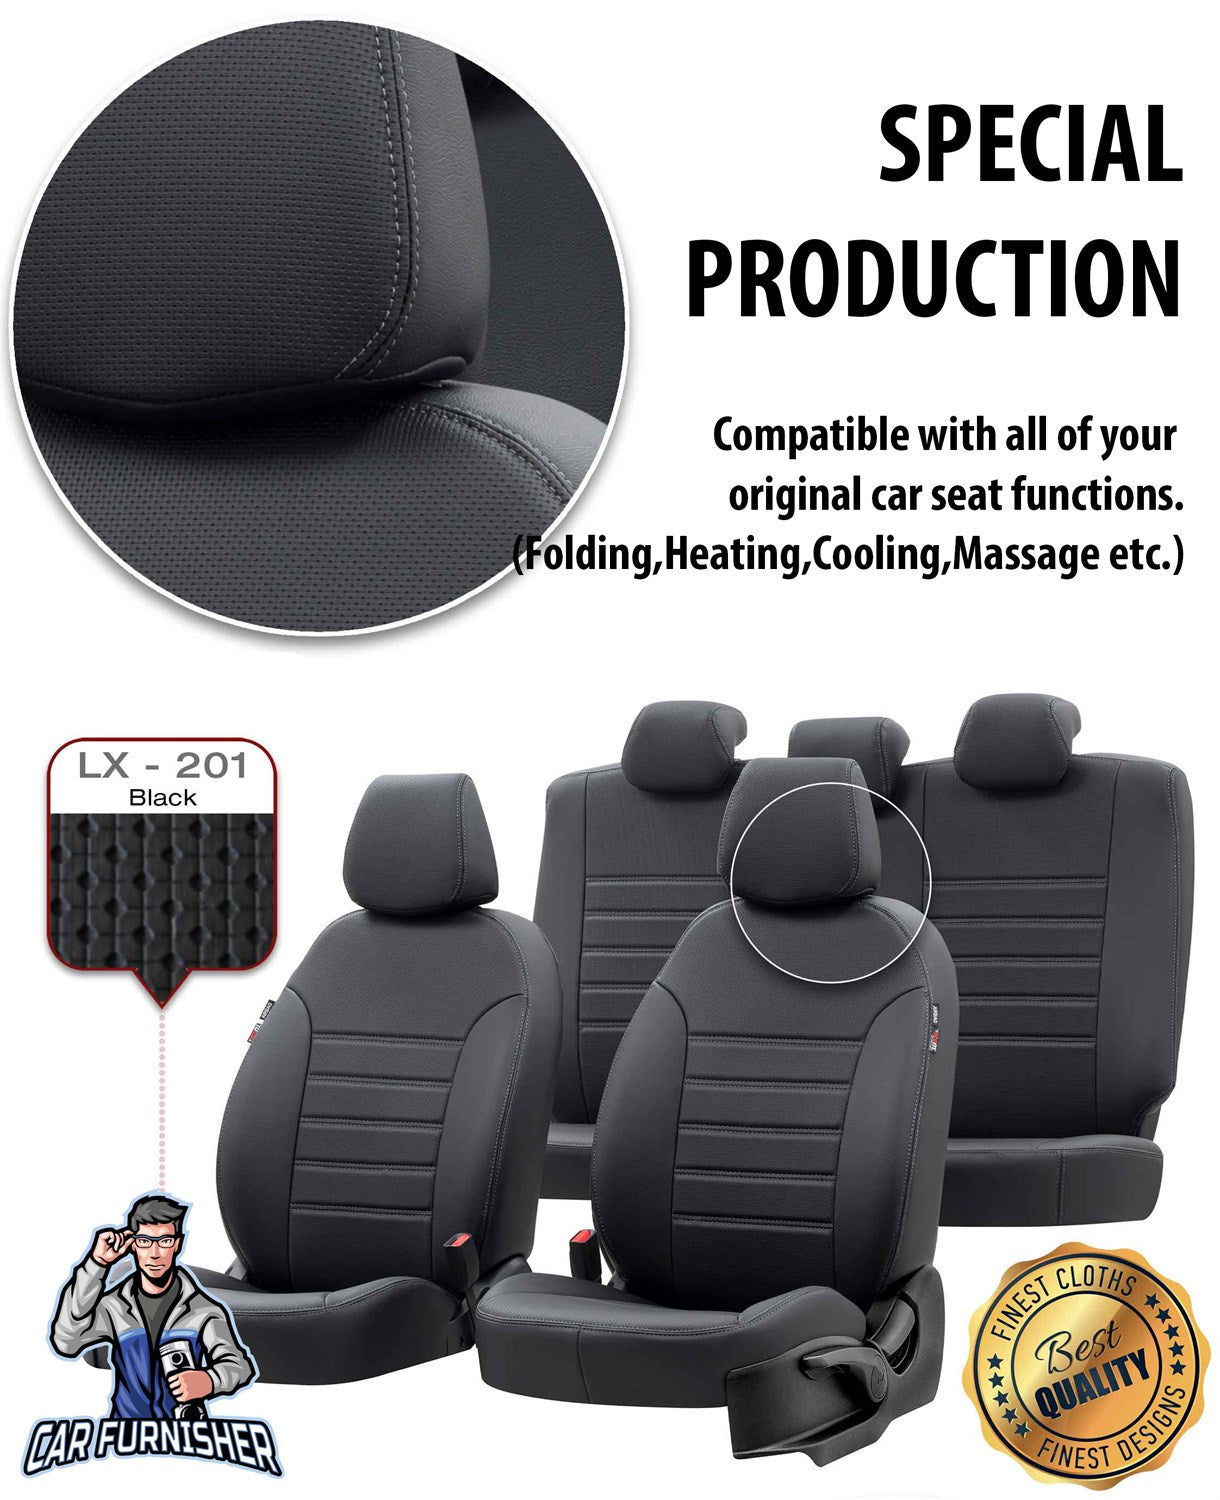 Chevrolet Captiva Seat Cover New York Leather Design Smoked Black Leather